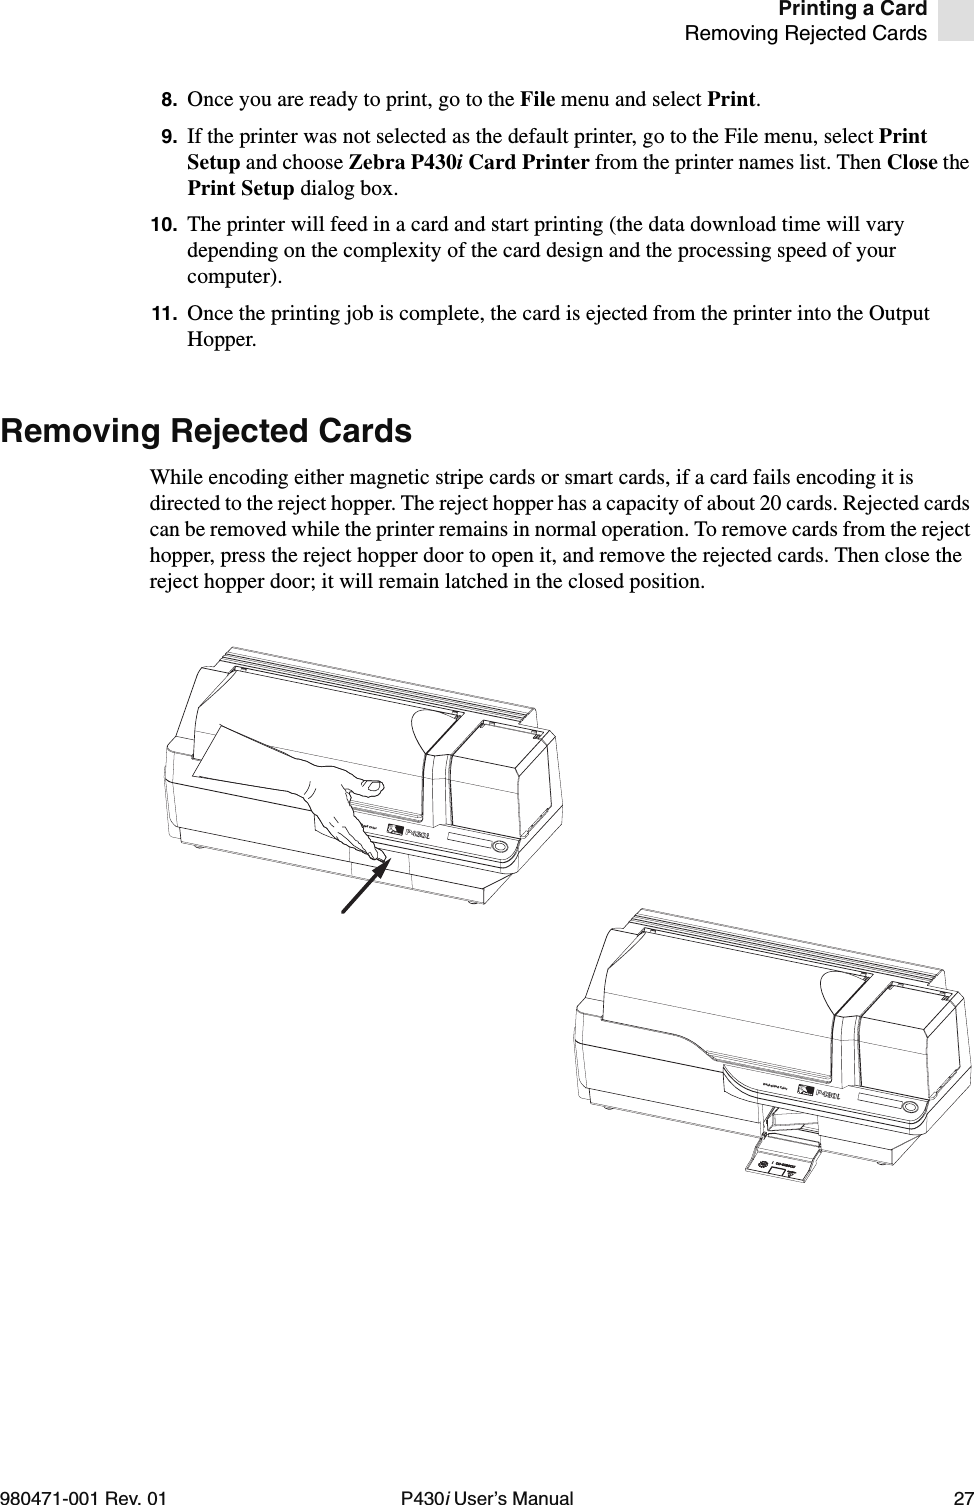 Printing a CardRemoving Rejected Cards980471-001 Rev. 01 P430i User’s Manual 278. Once you are ready to print, go to the File menu and select Print.9. If the printer was not selected as the default printer, go to the File menu, select Print Setup and choose Zebra P430i Card Printer from the printer names list. Then Close the Print Setup dialog box.10. The printer will feed in a card and start printing (the data download time will vary depending on the complexity of the card design and the processing speed of your computer).11. Once the printing job is complete, the card is ejected from the printer into the Output Hopper.Removing Rejected CardsWhile encoding either magnetic stripe cards or smart cards, if a card fails encoding it is directed to the reject hopper. The reject hopper has a capacity of about 20 cards. Rejected cards can be removed while the printer remains in normal operation. To remove cards from the reject hopper, press the reject hopper door to open it, and remove the rejected cards. Then close the reject hopper door; it will remain latched in the closed position.Dual-Sided ColorDual-Sided Color